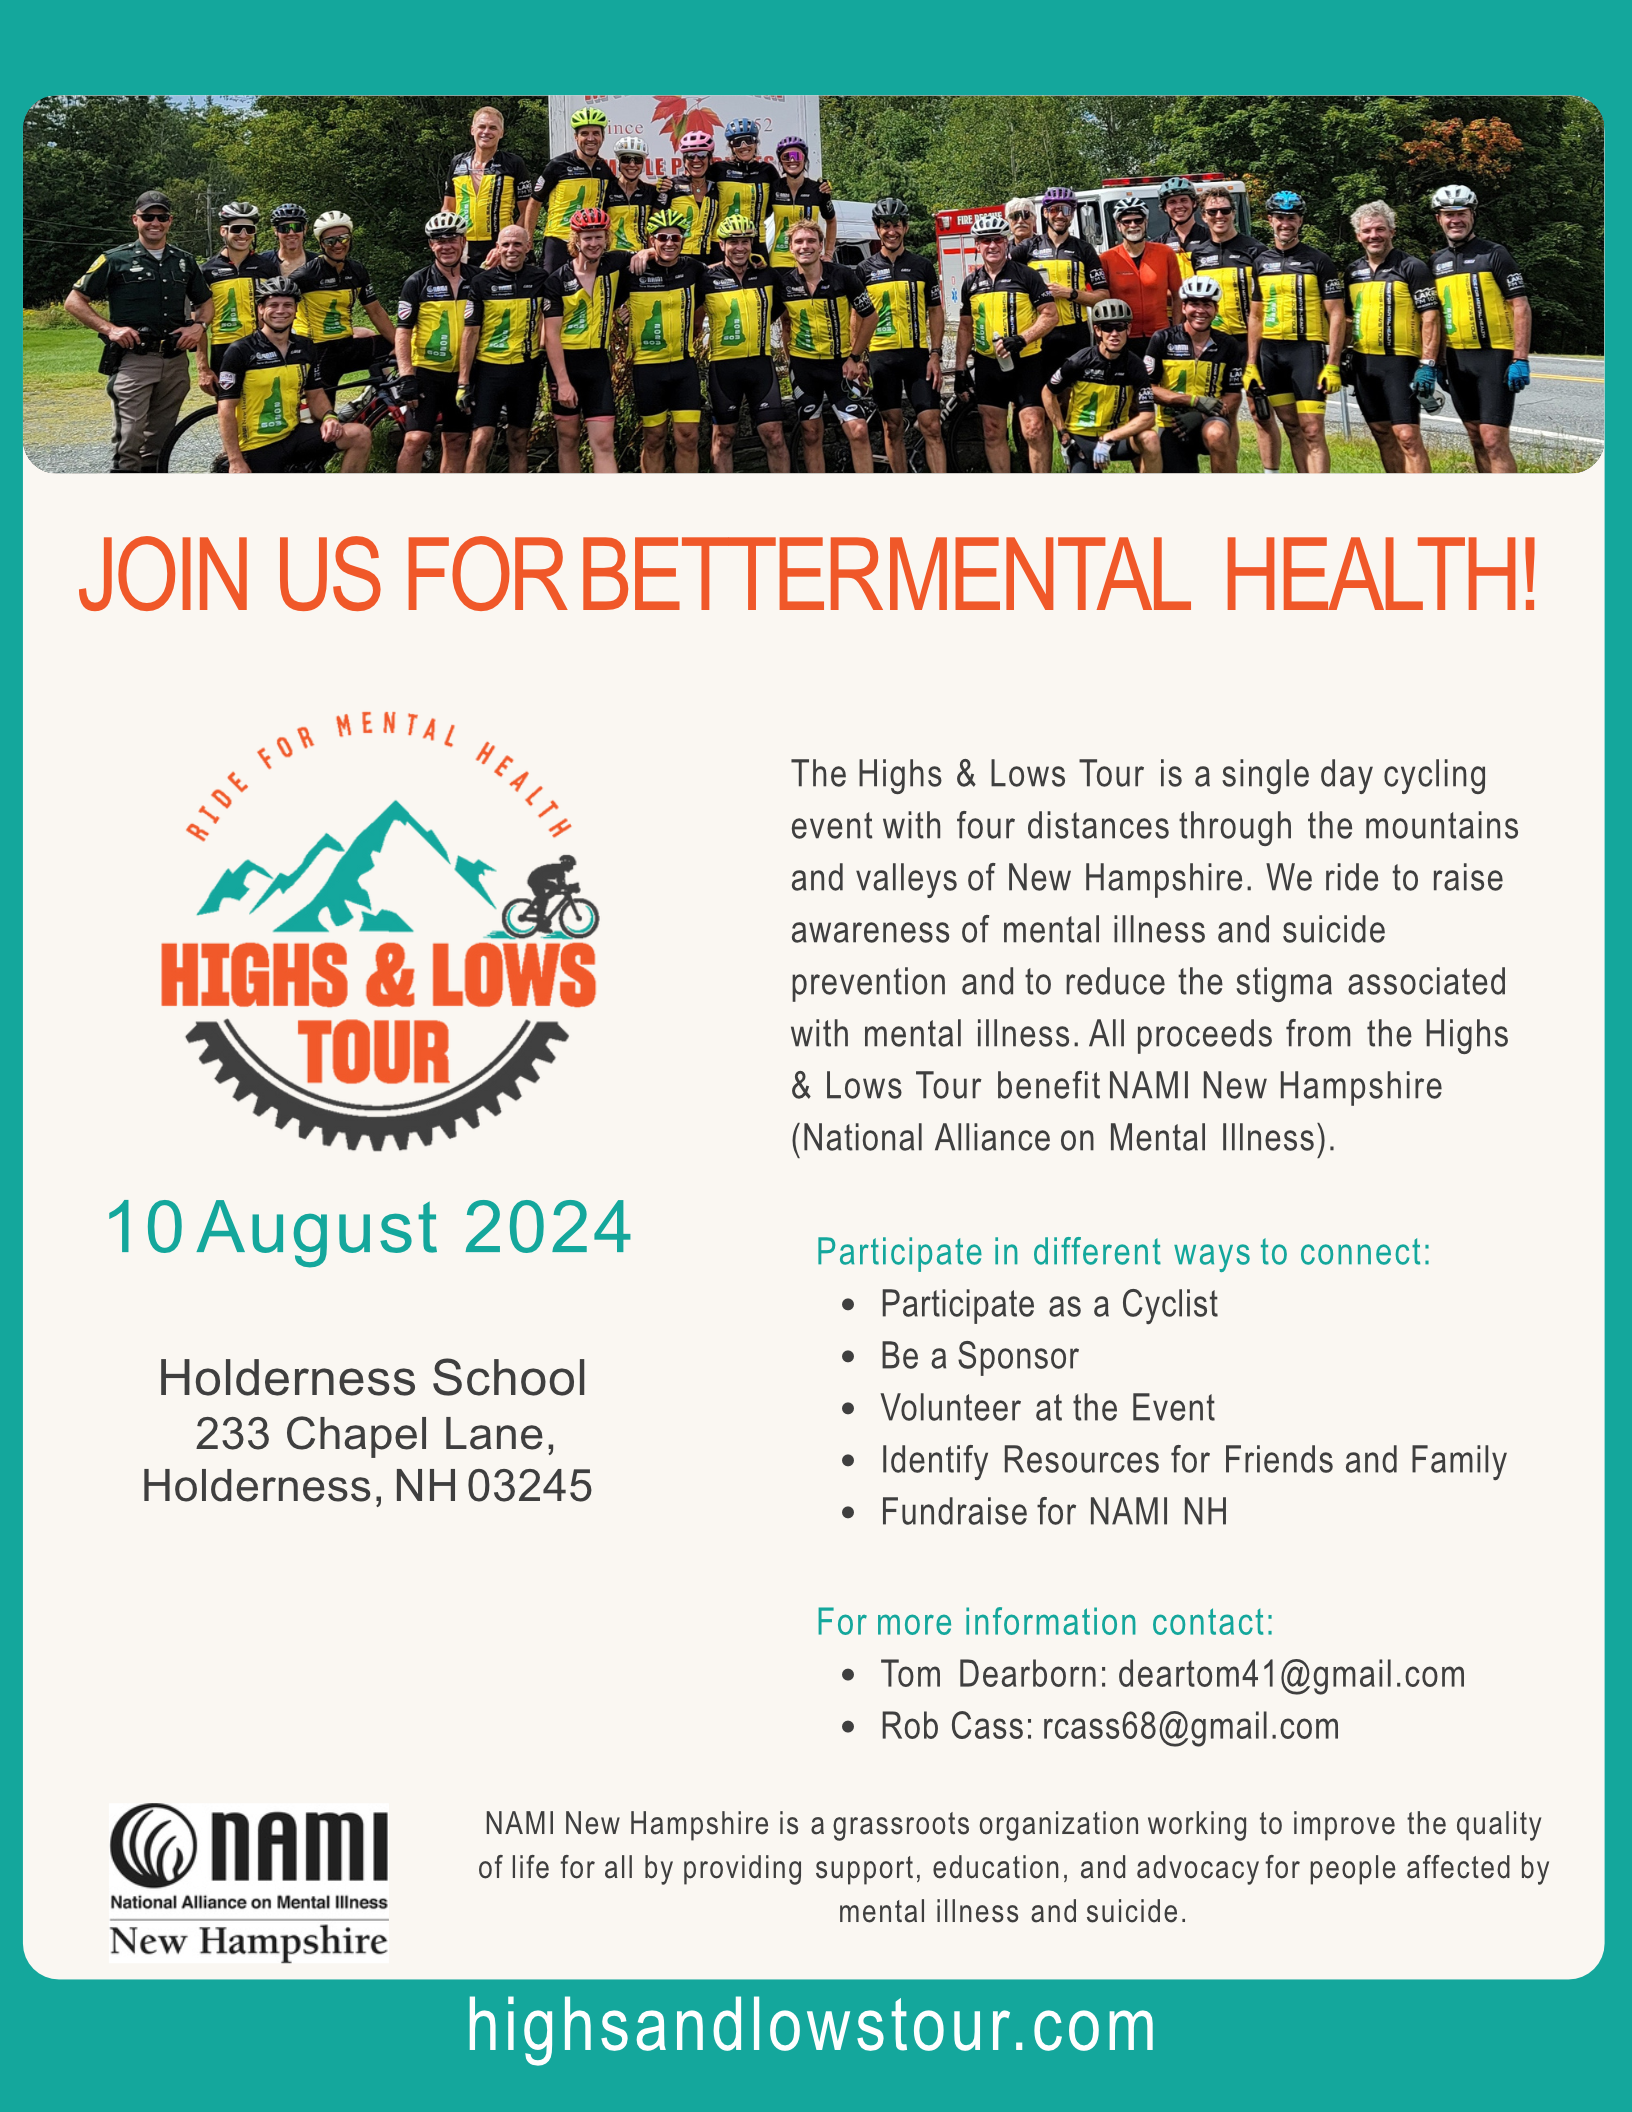 Highs & Lows Tour Ride for Mental Health